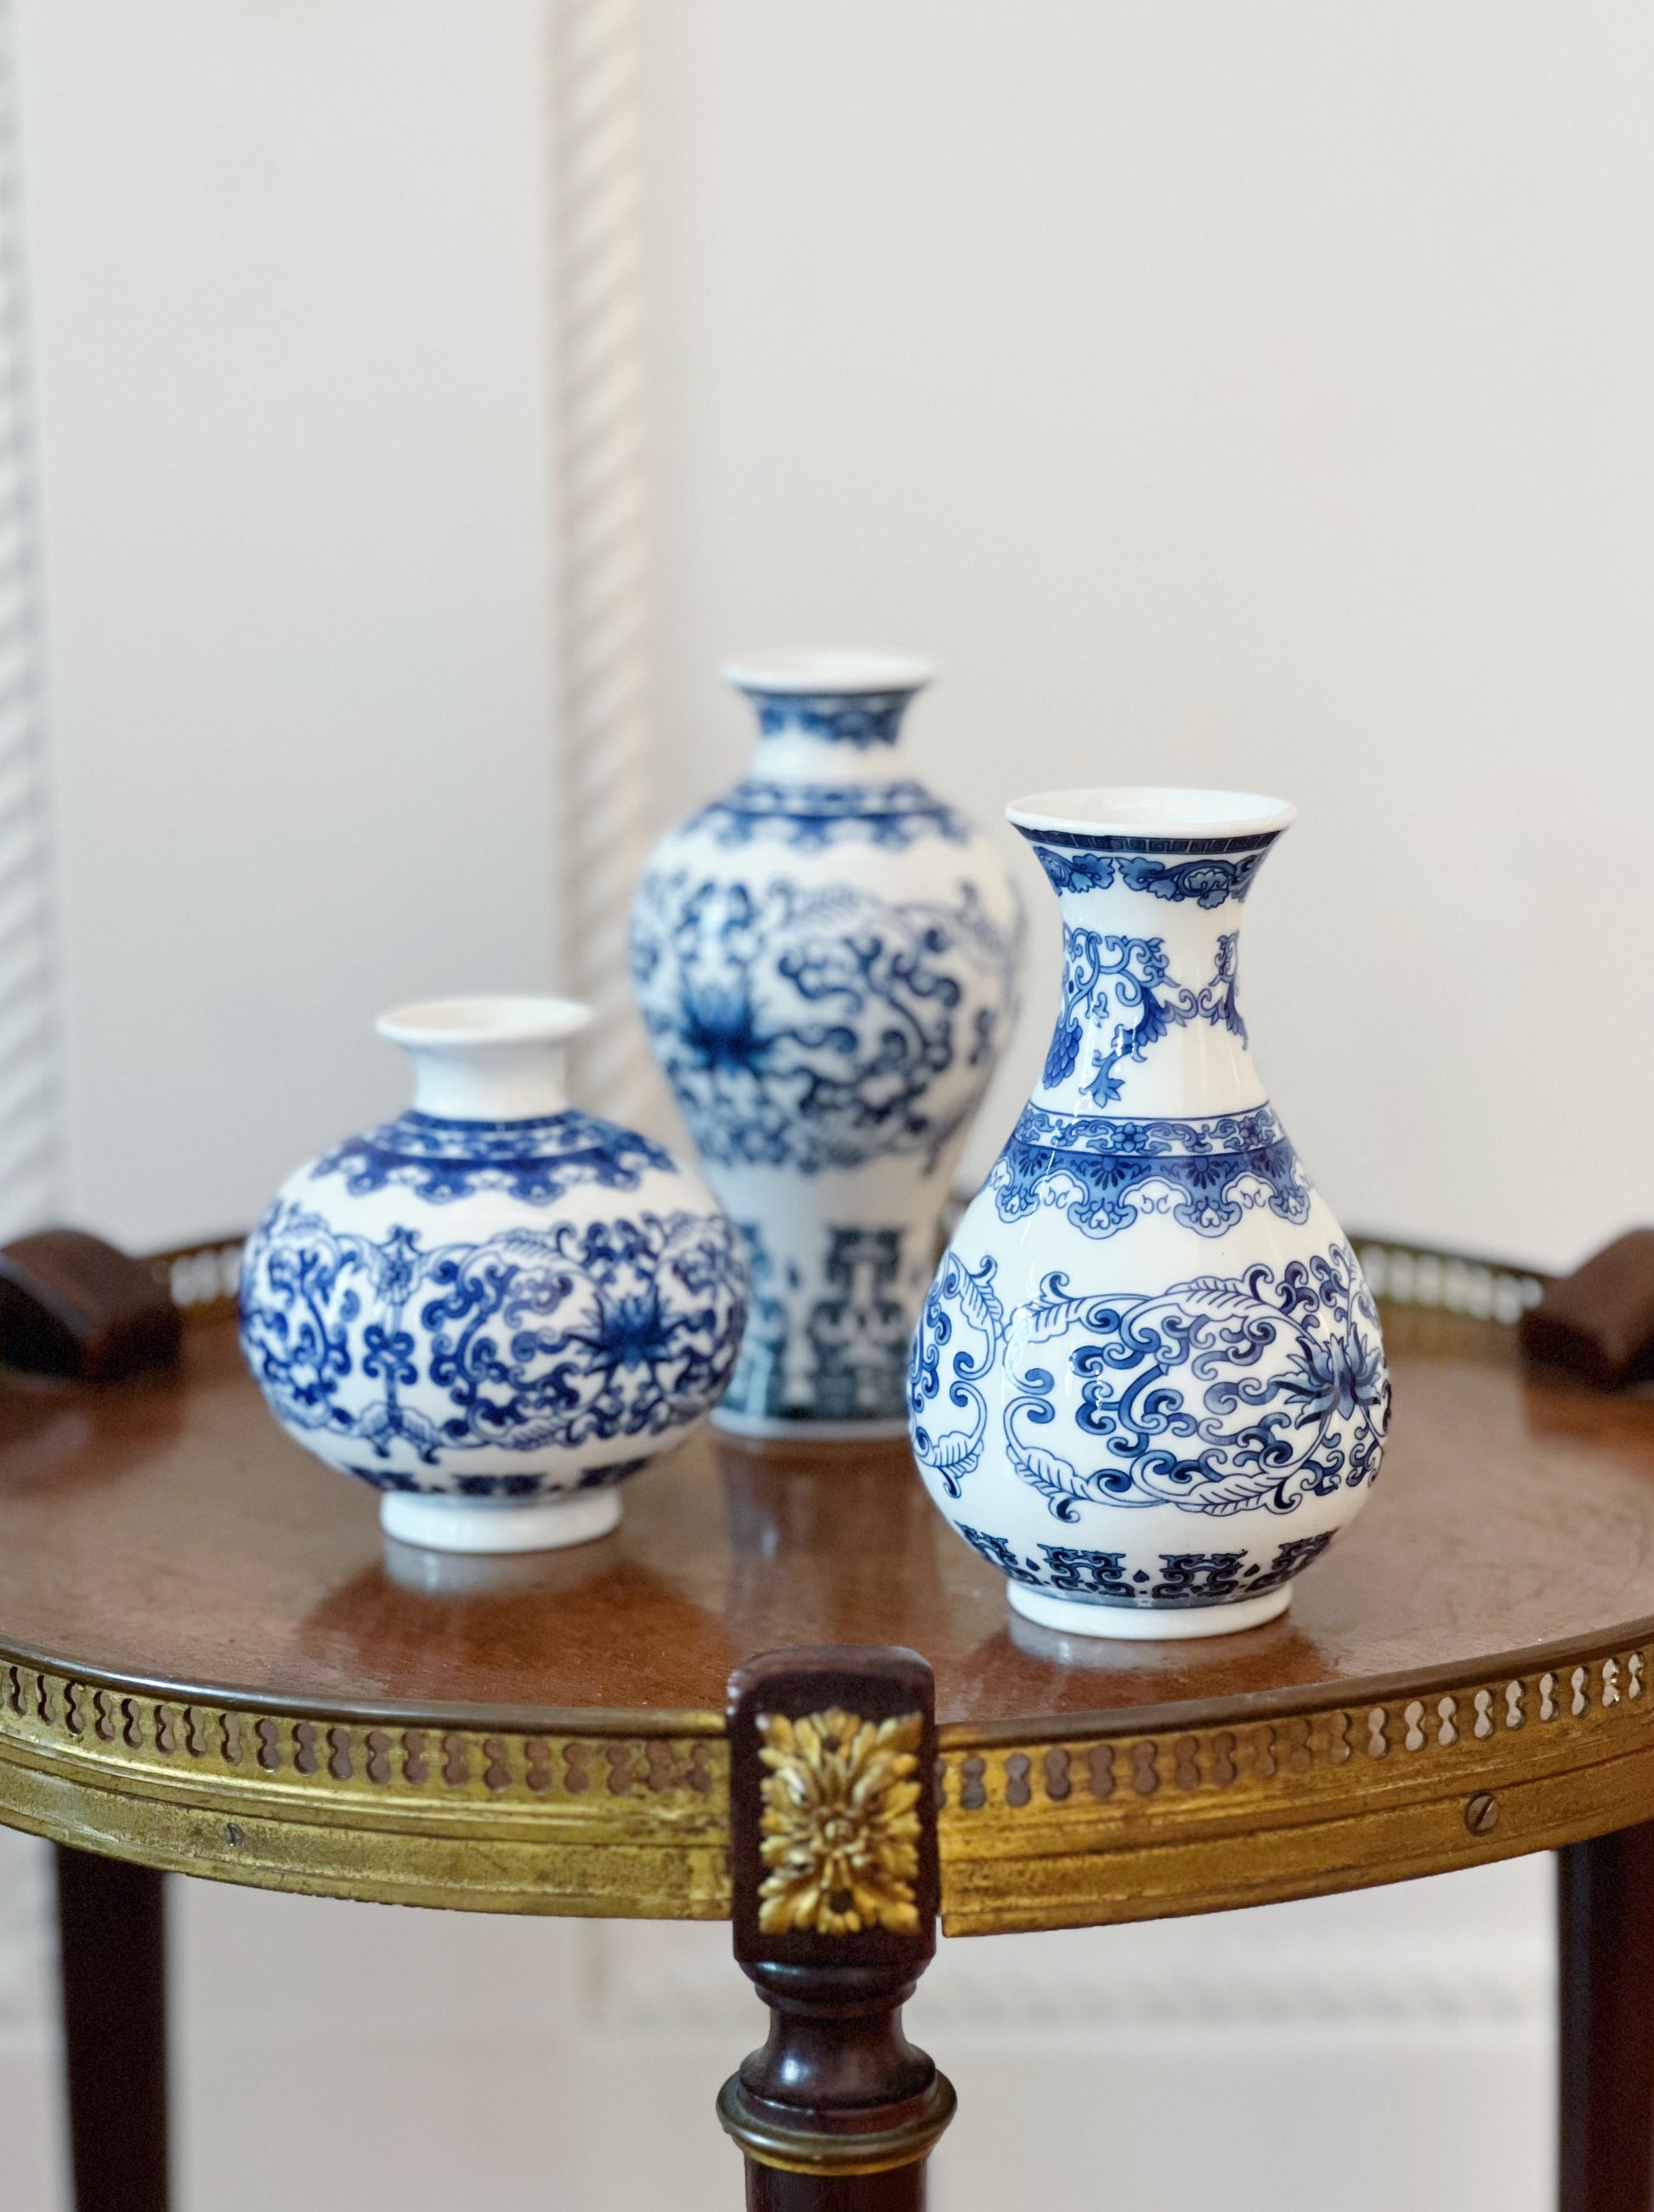 set of three blue and white bud vases on a round wooden table